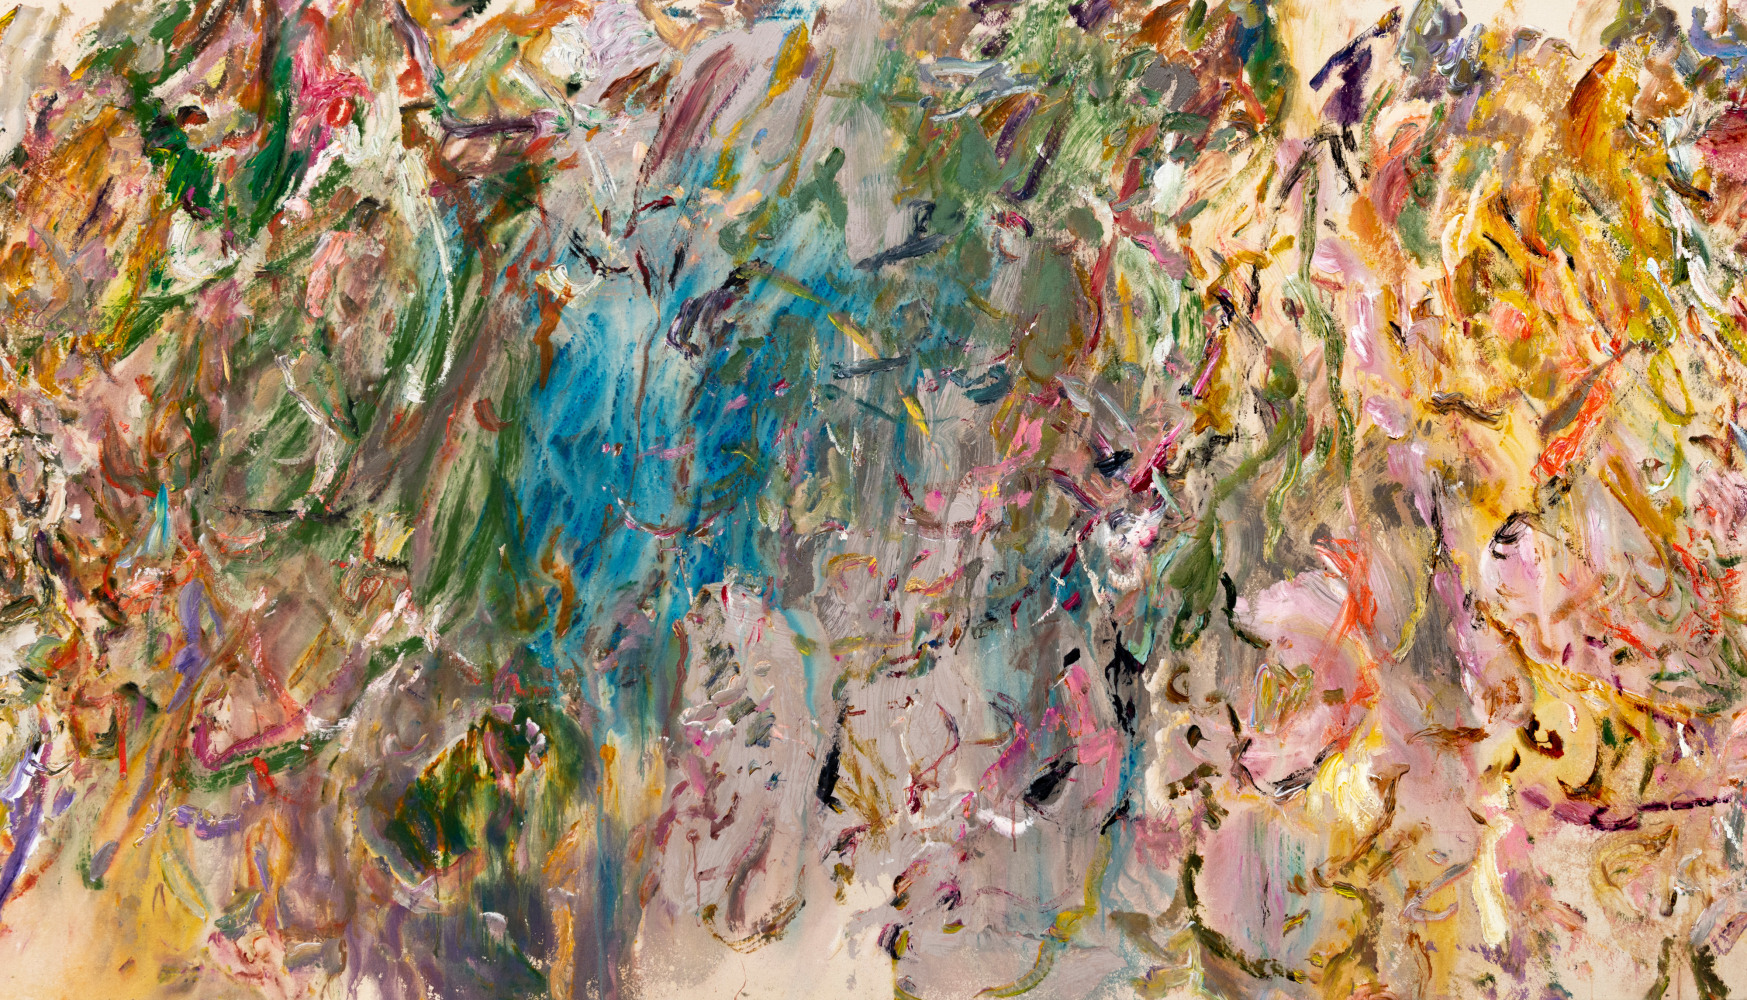 LARRY POONS (American b. 1937)

Racehorse

2021

Acrylic on canvas

55 1/2 x 96 1/2 inches

141 x 245.1cm